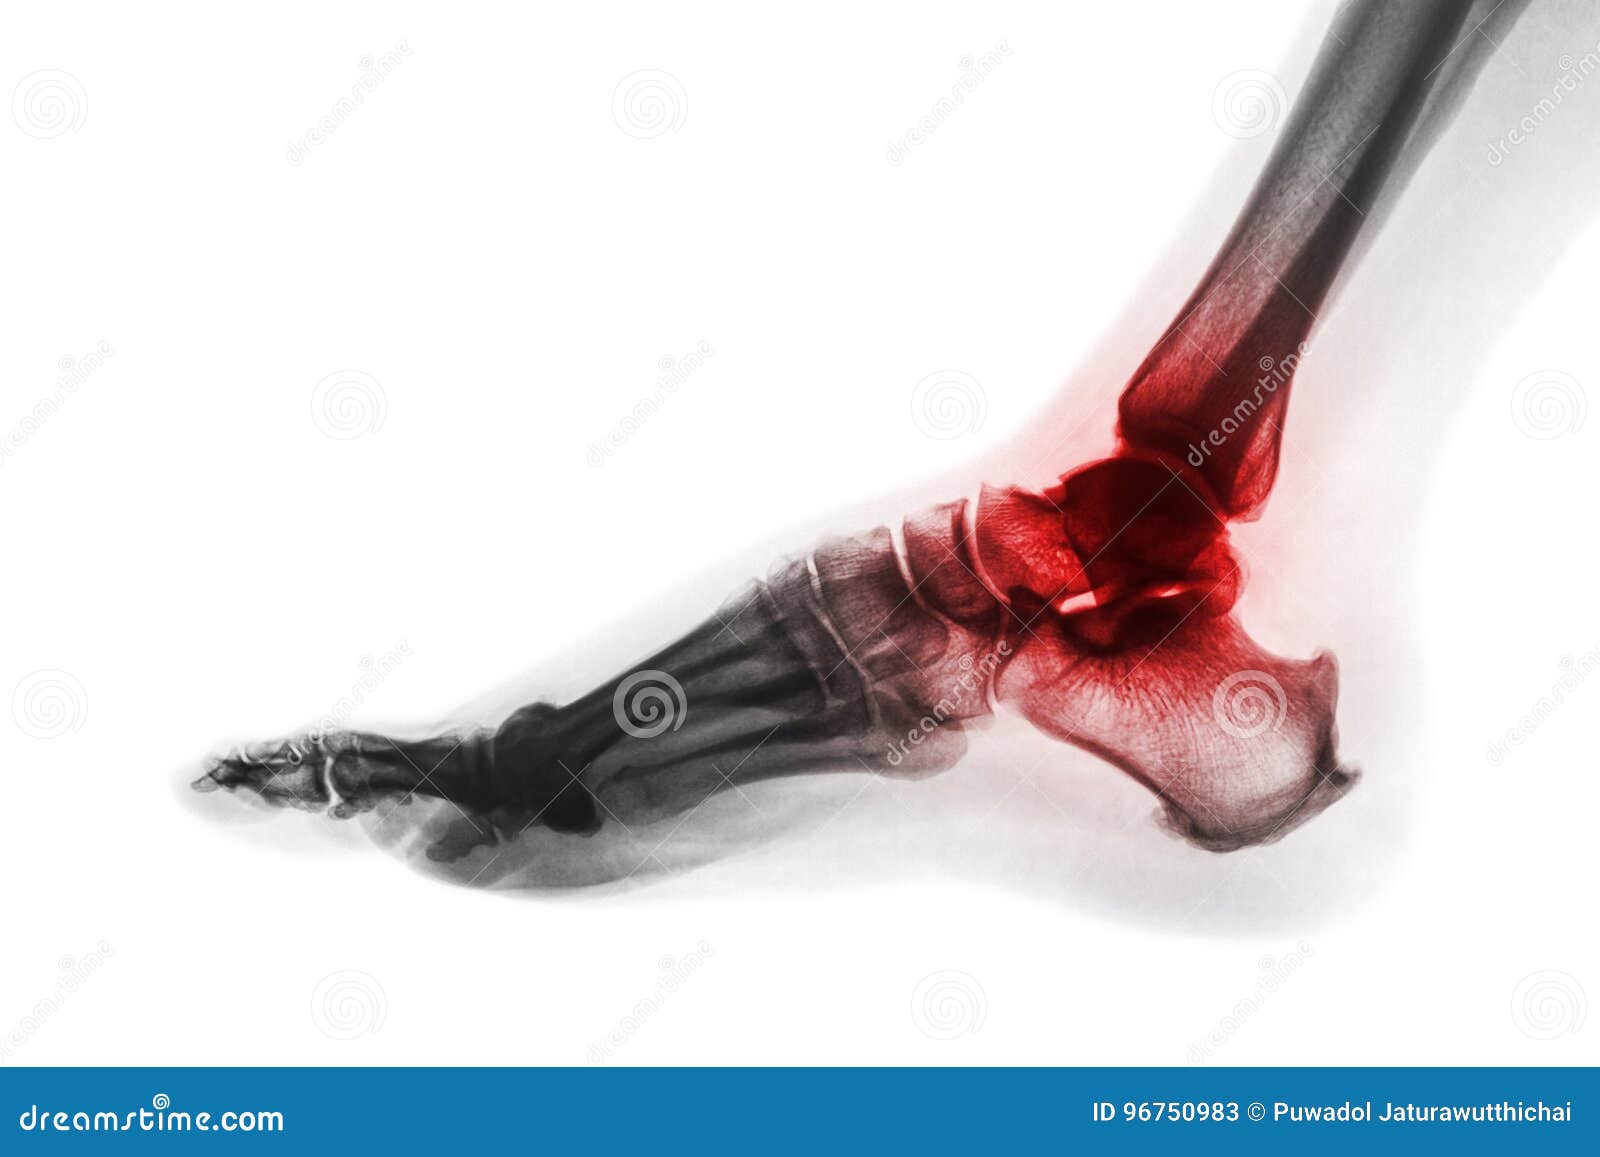 arthritis of ankle . x-ray of foot . lateral view . invert color style . gout or rheumatoid concept